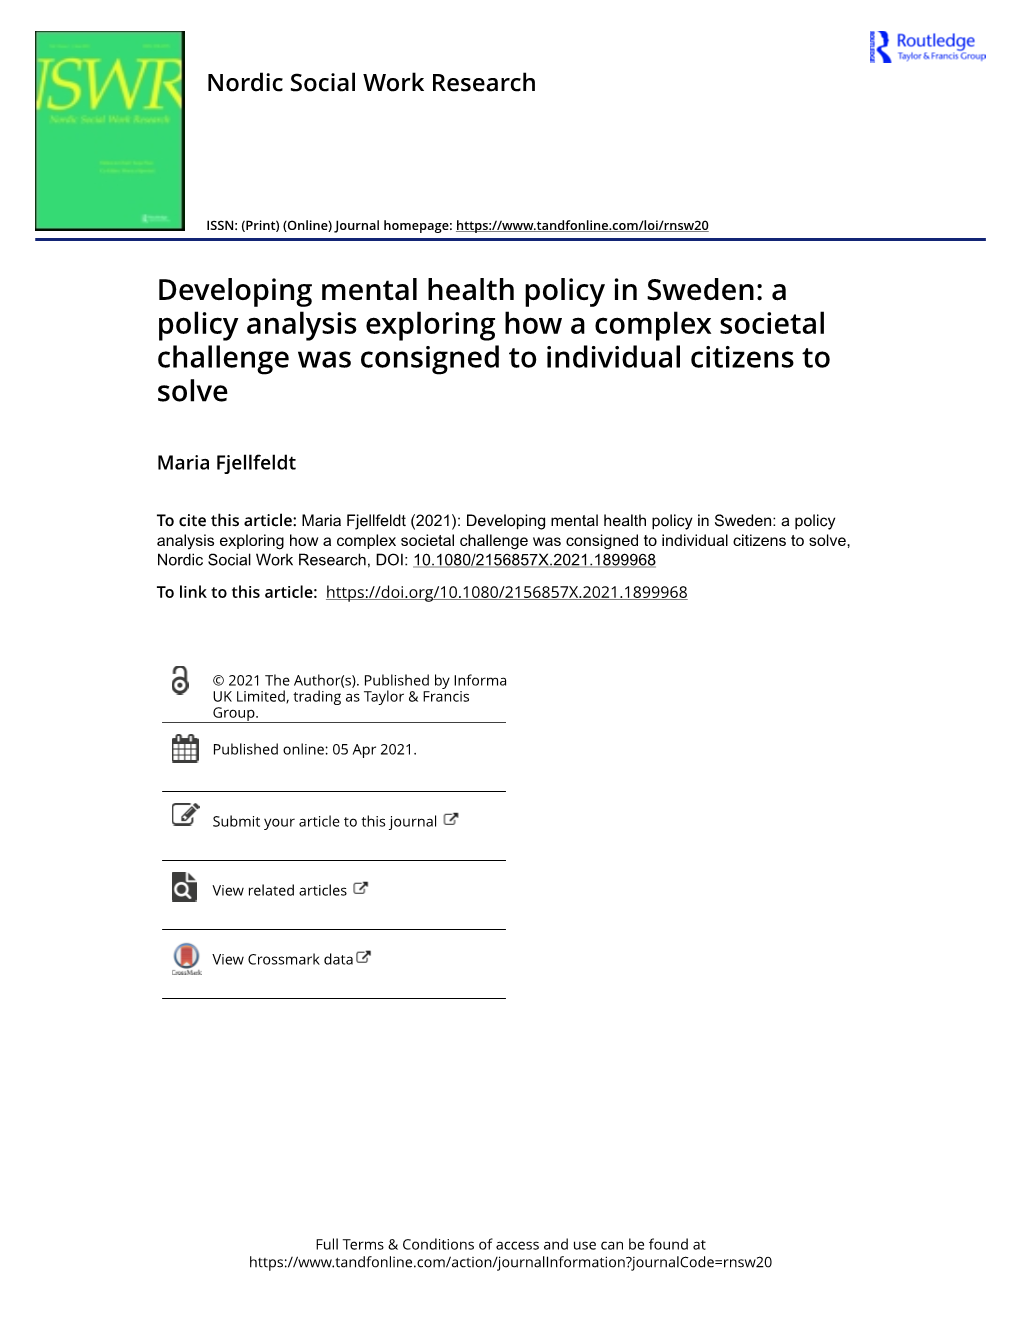 Developing Mental Health Policy in Sweden: a Policy Analysis Exploring How a Complex Societal Challenge Was Consigned to Individual Citizens to Solve